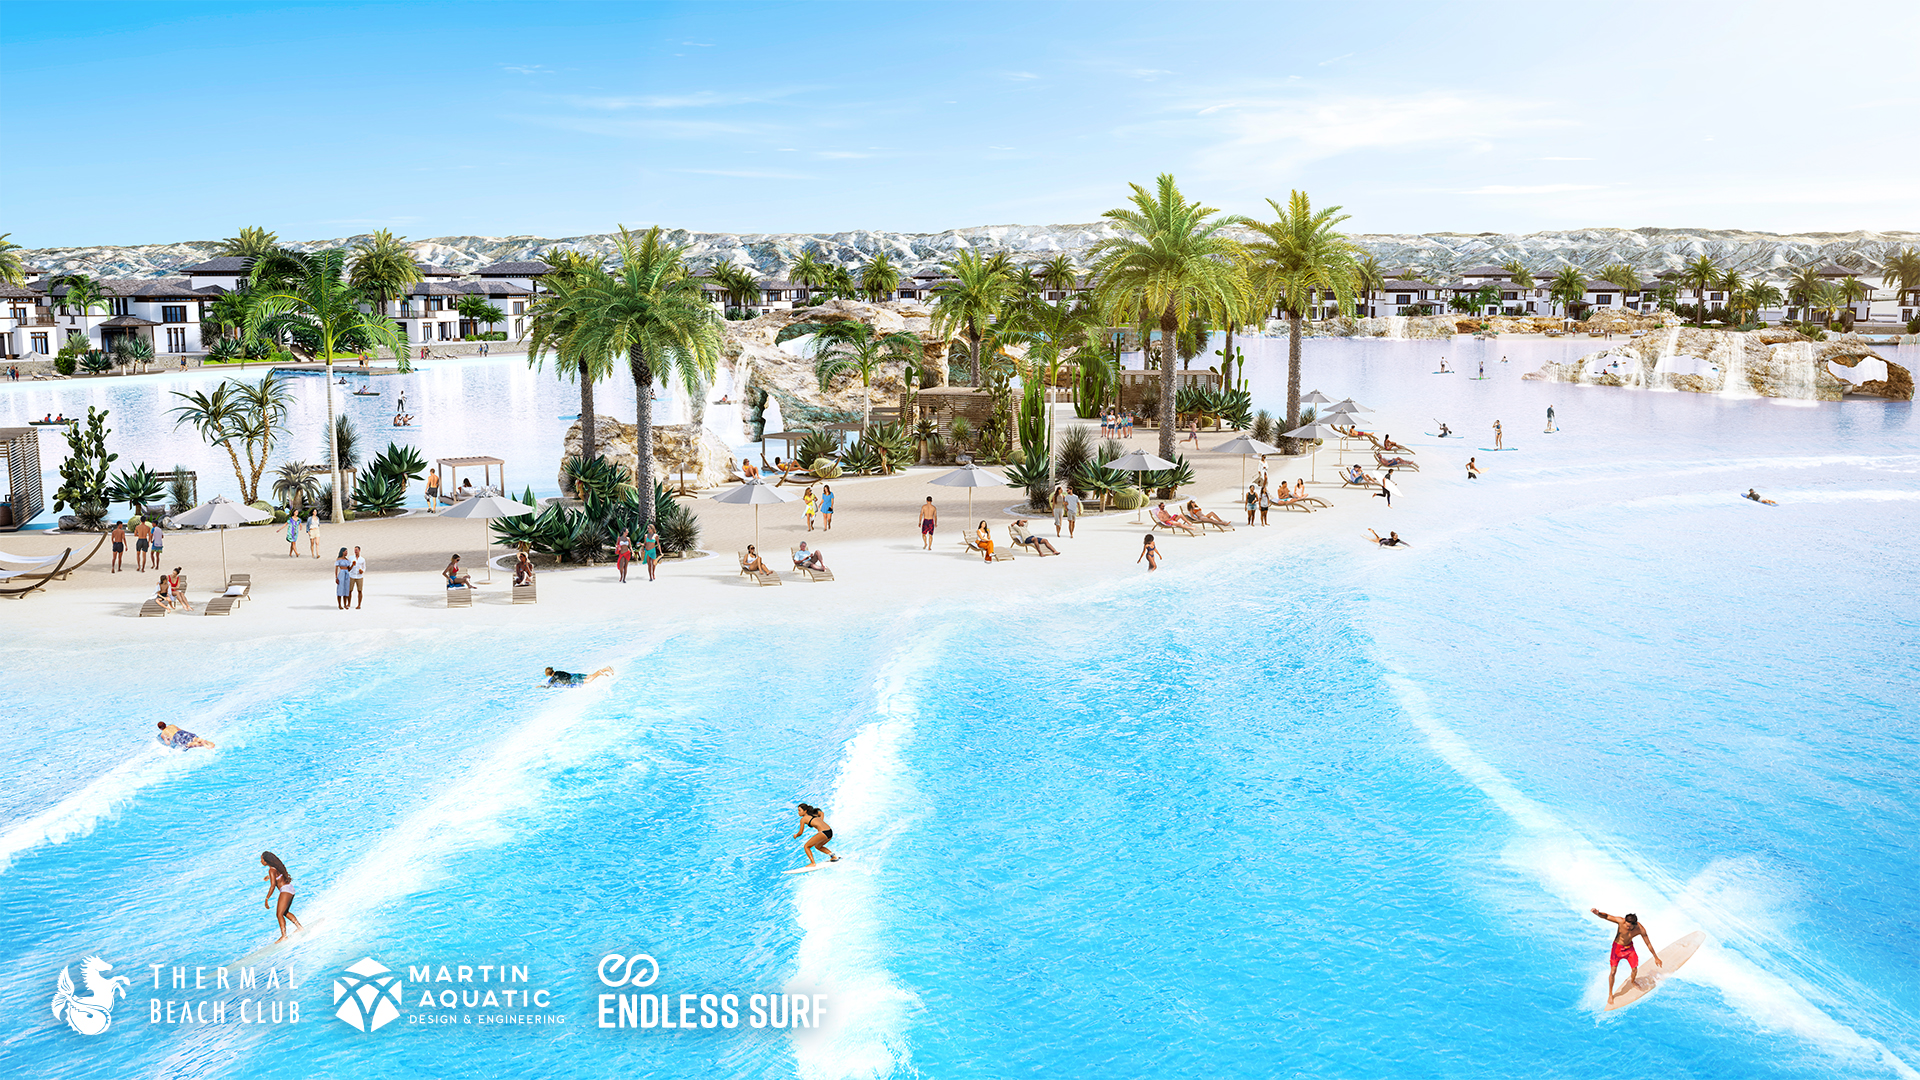 Rendering of Endless Surf lagoon at Coachella Valley surf park, Thermal Beach Club